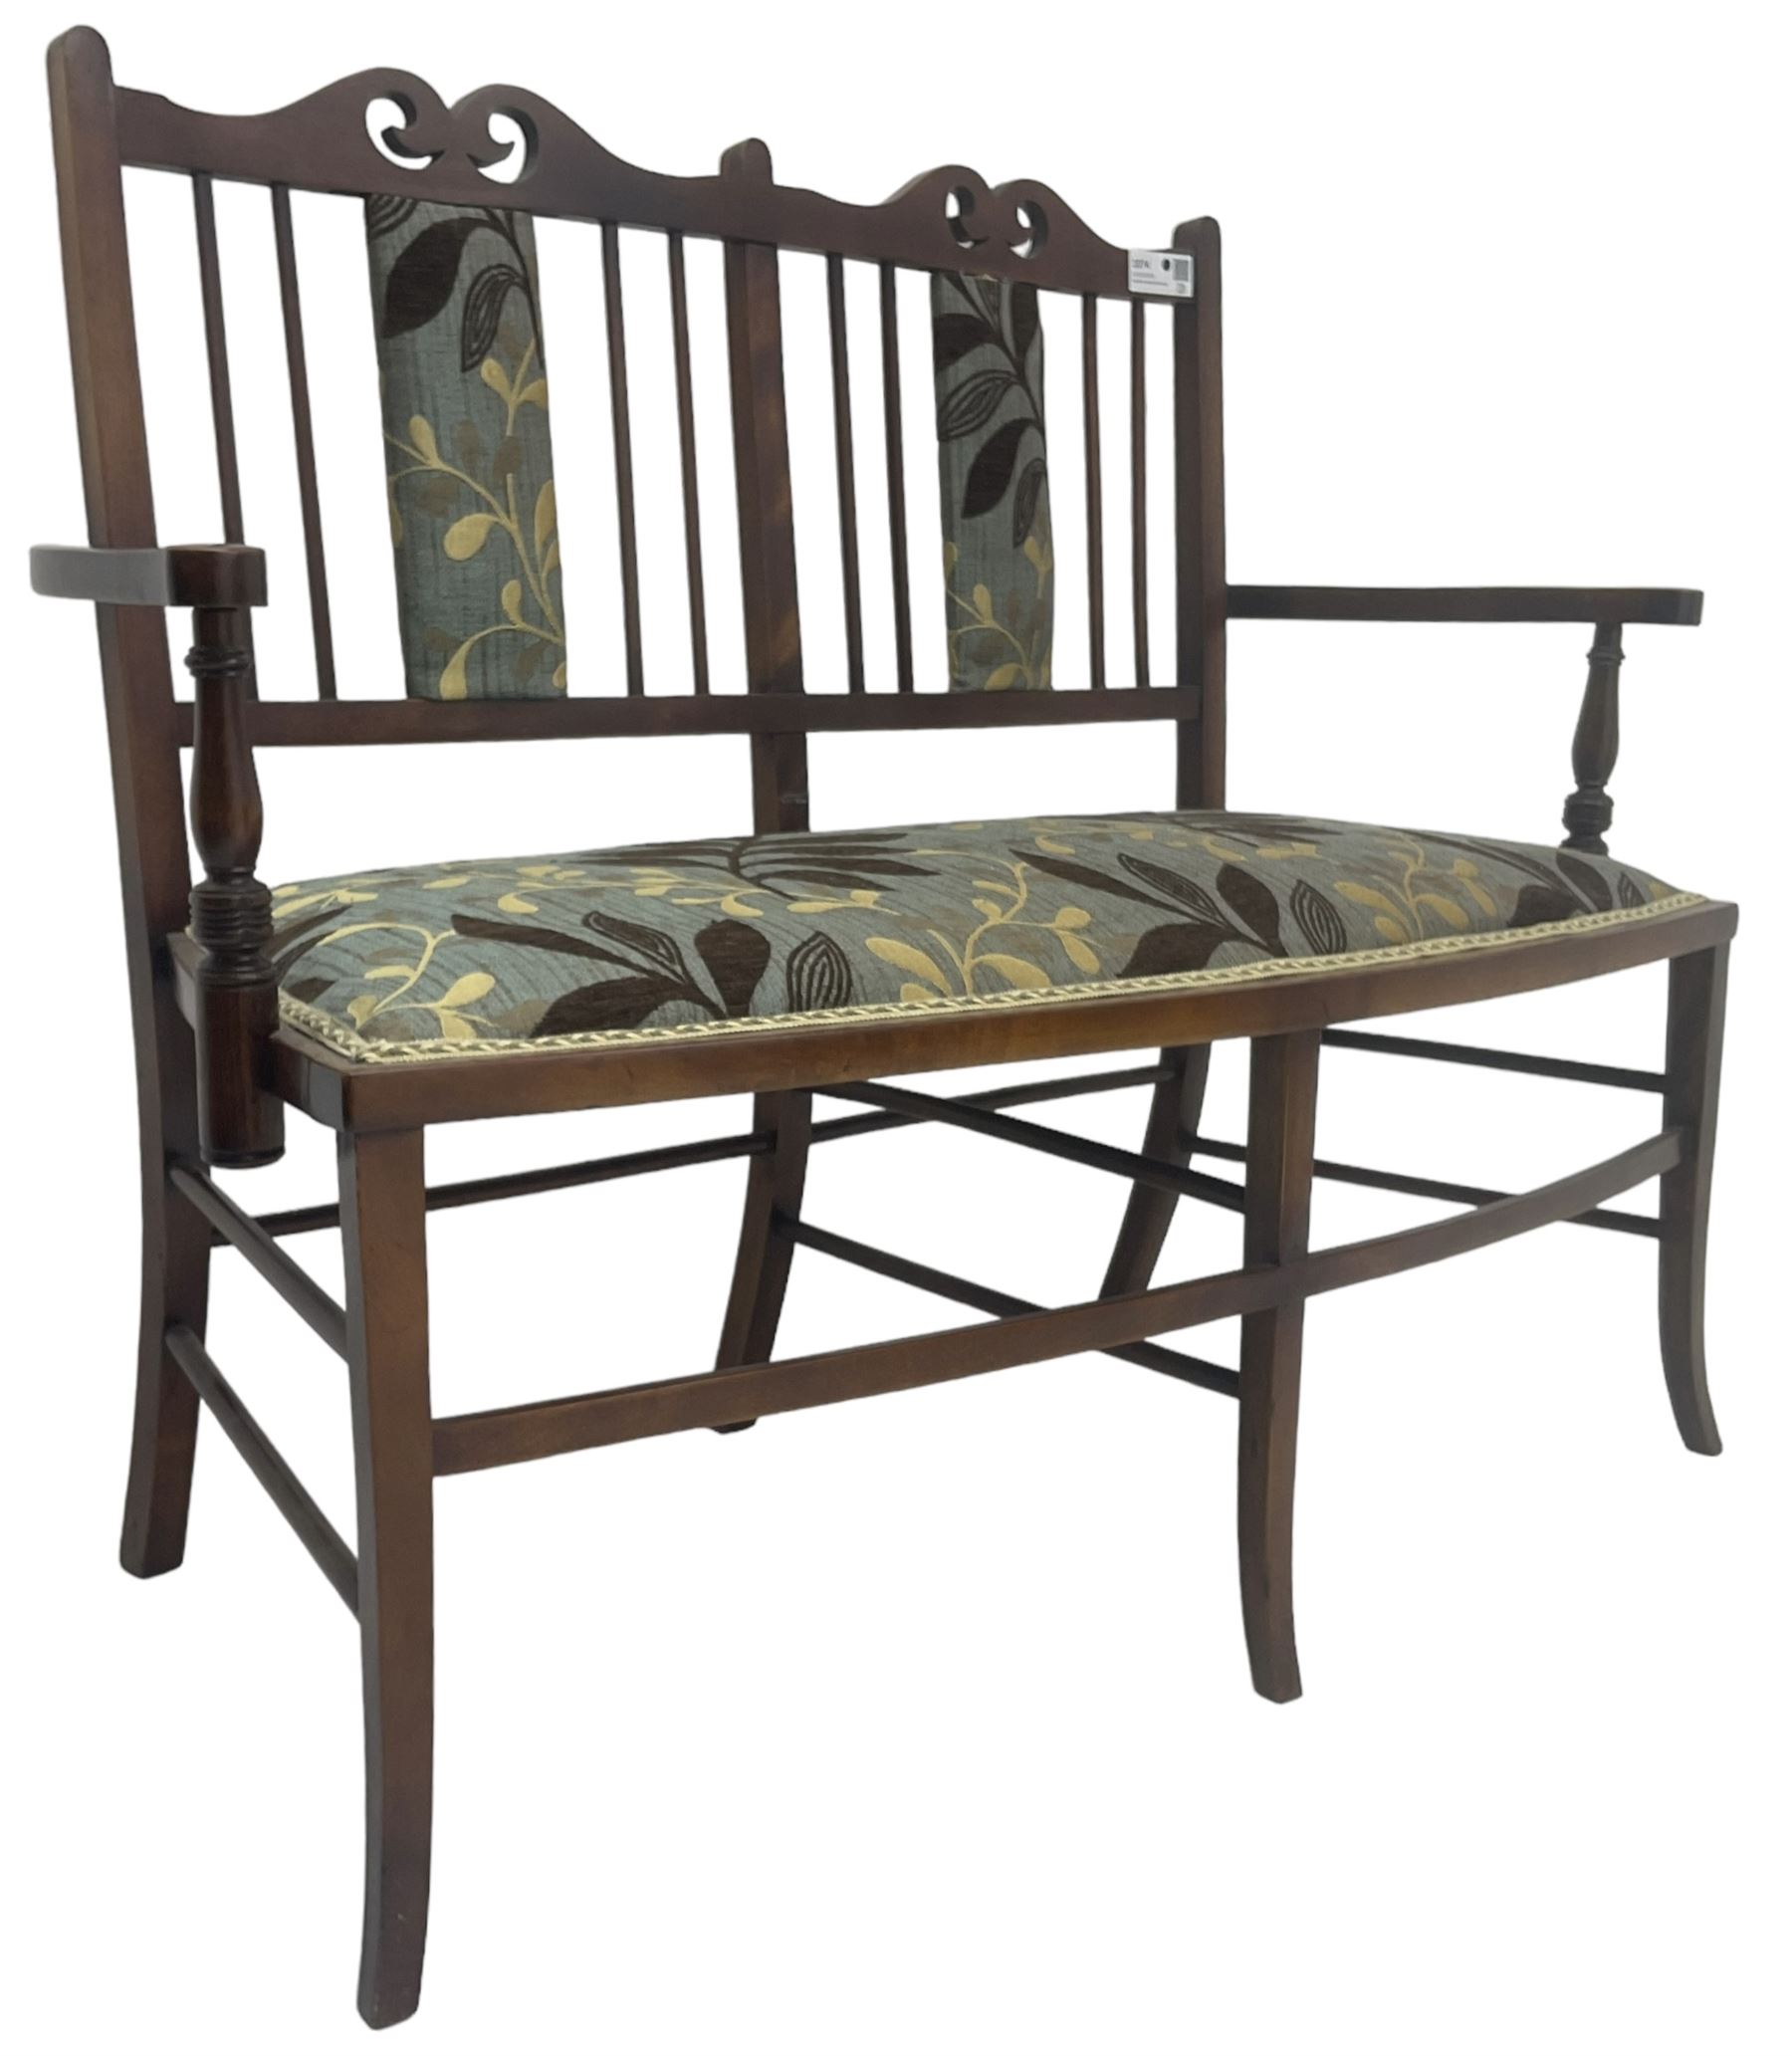 Edwardian stained beech framed two-seat settee - Image 4 of 6